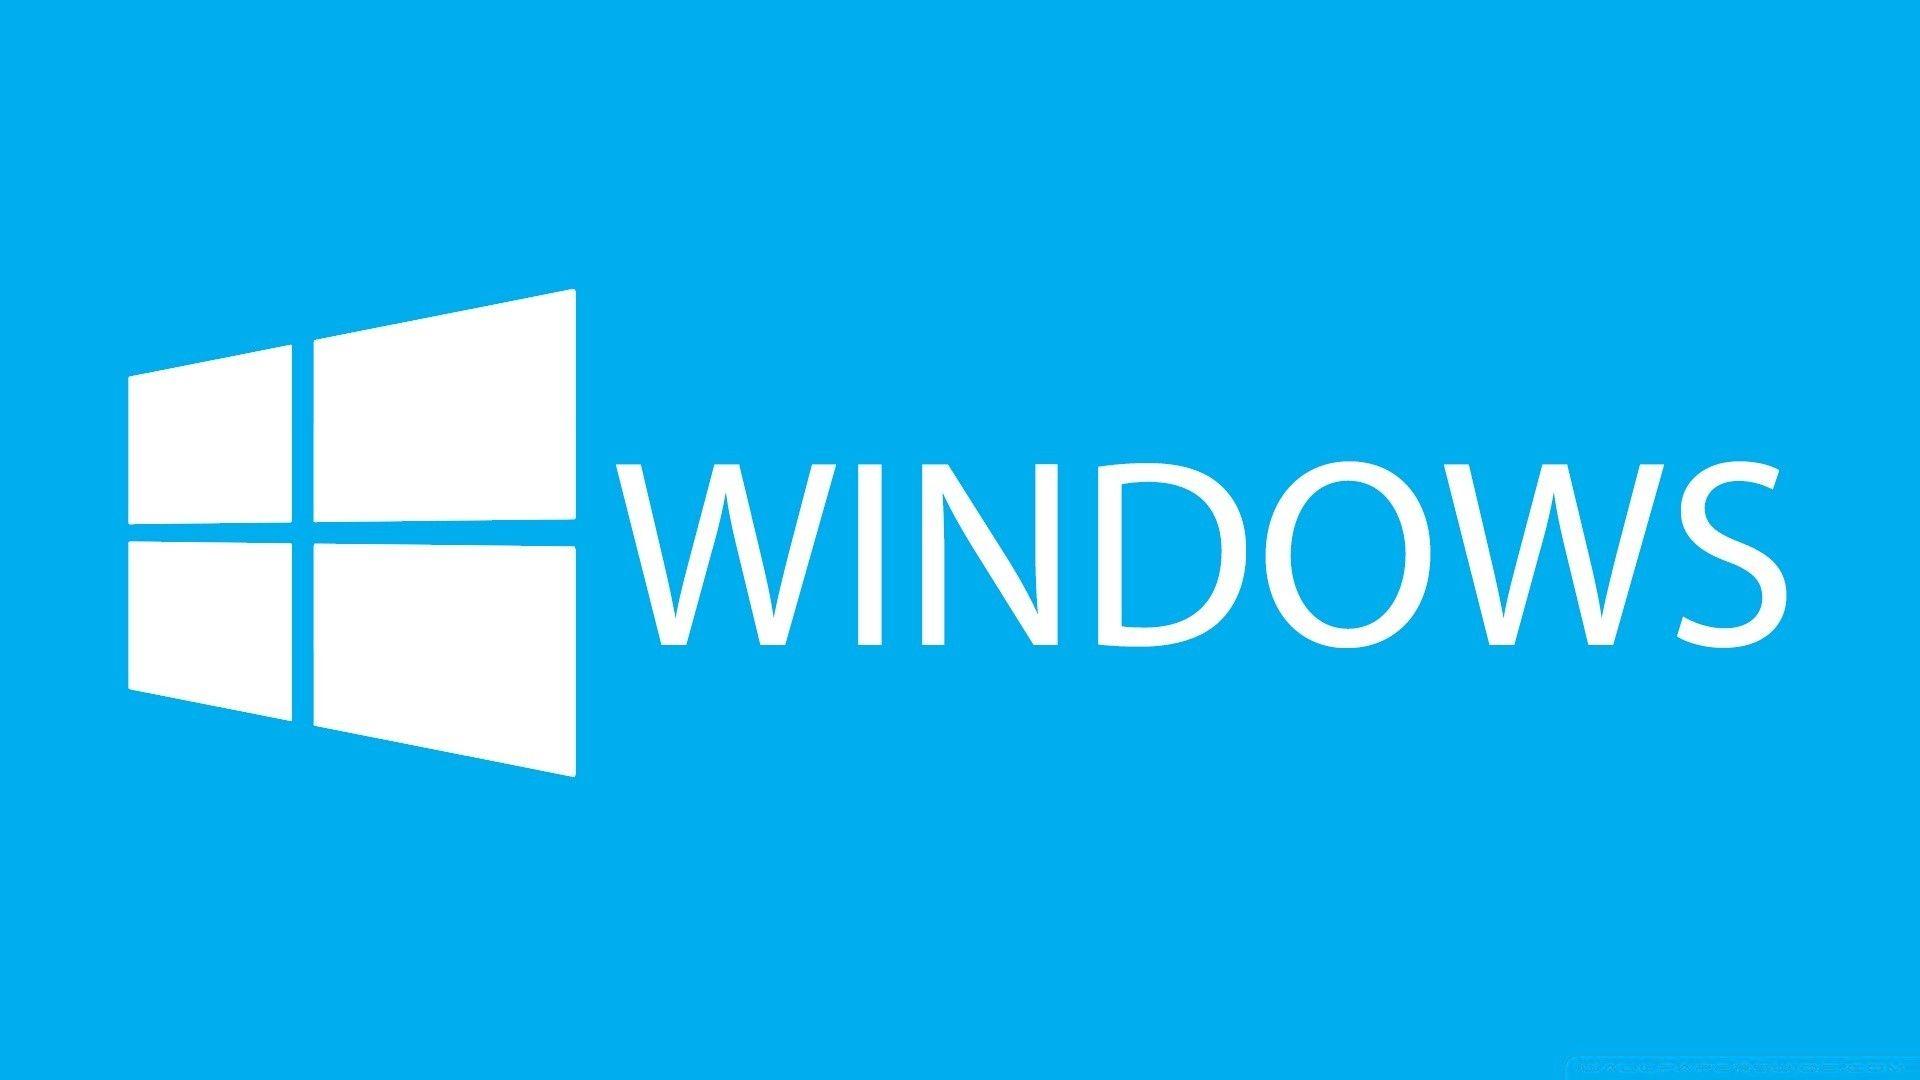 Windows 8 BLUE. Android wallpaper for free